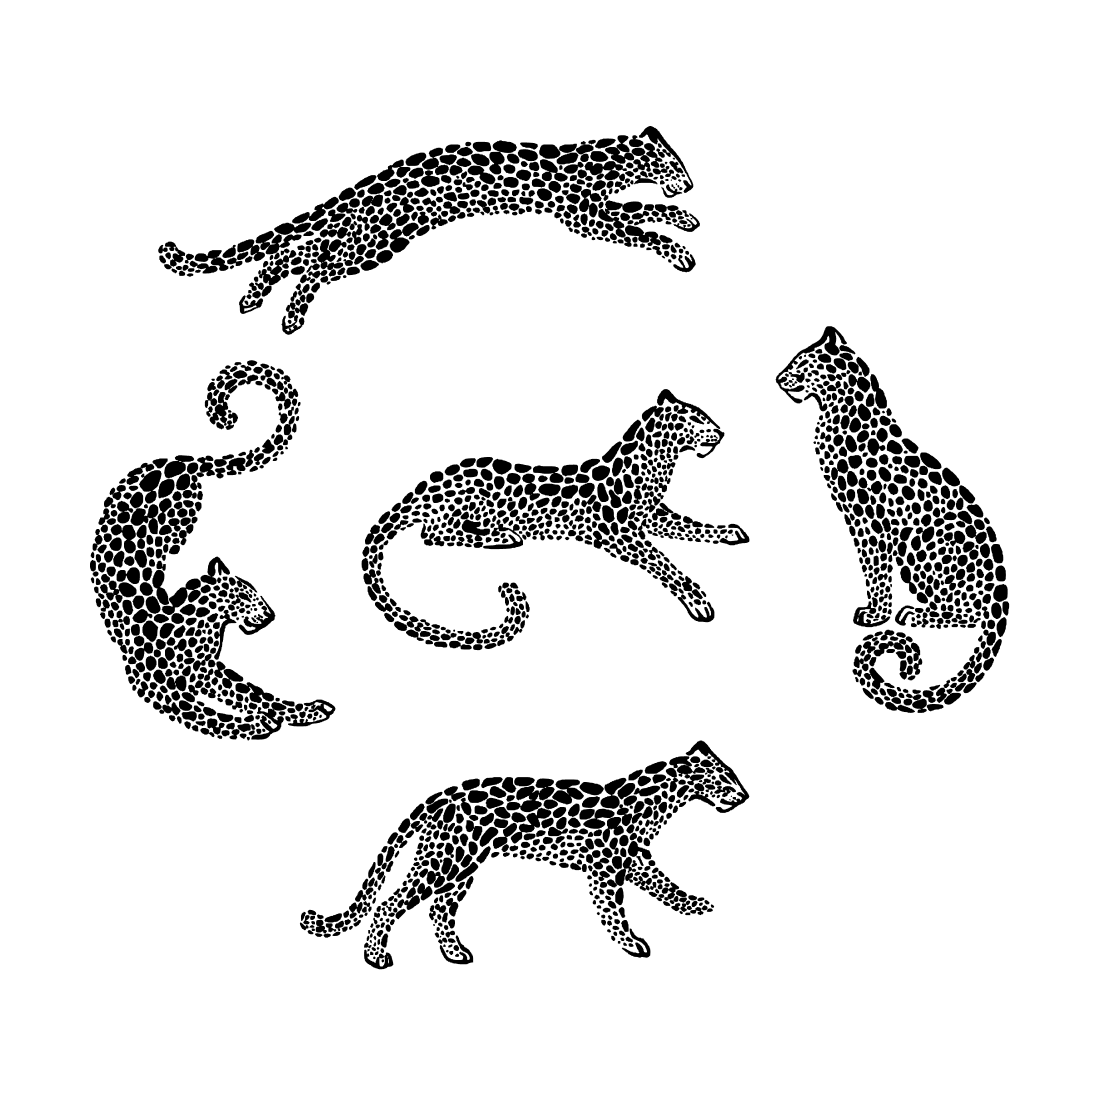 Three cheetah silhouettes in a circle on a white background.